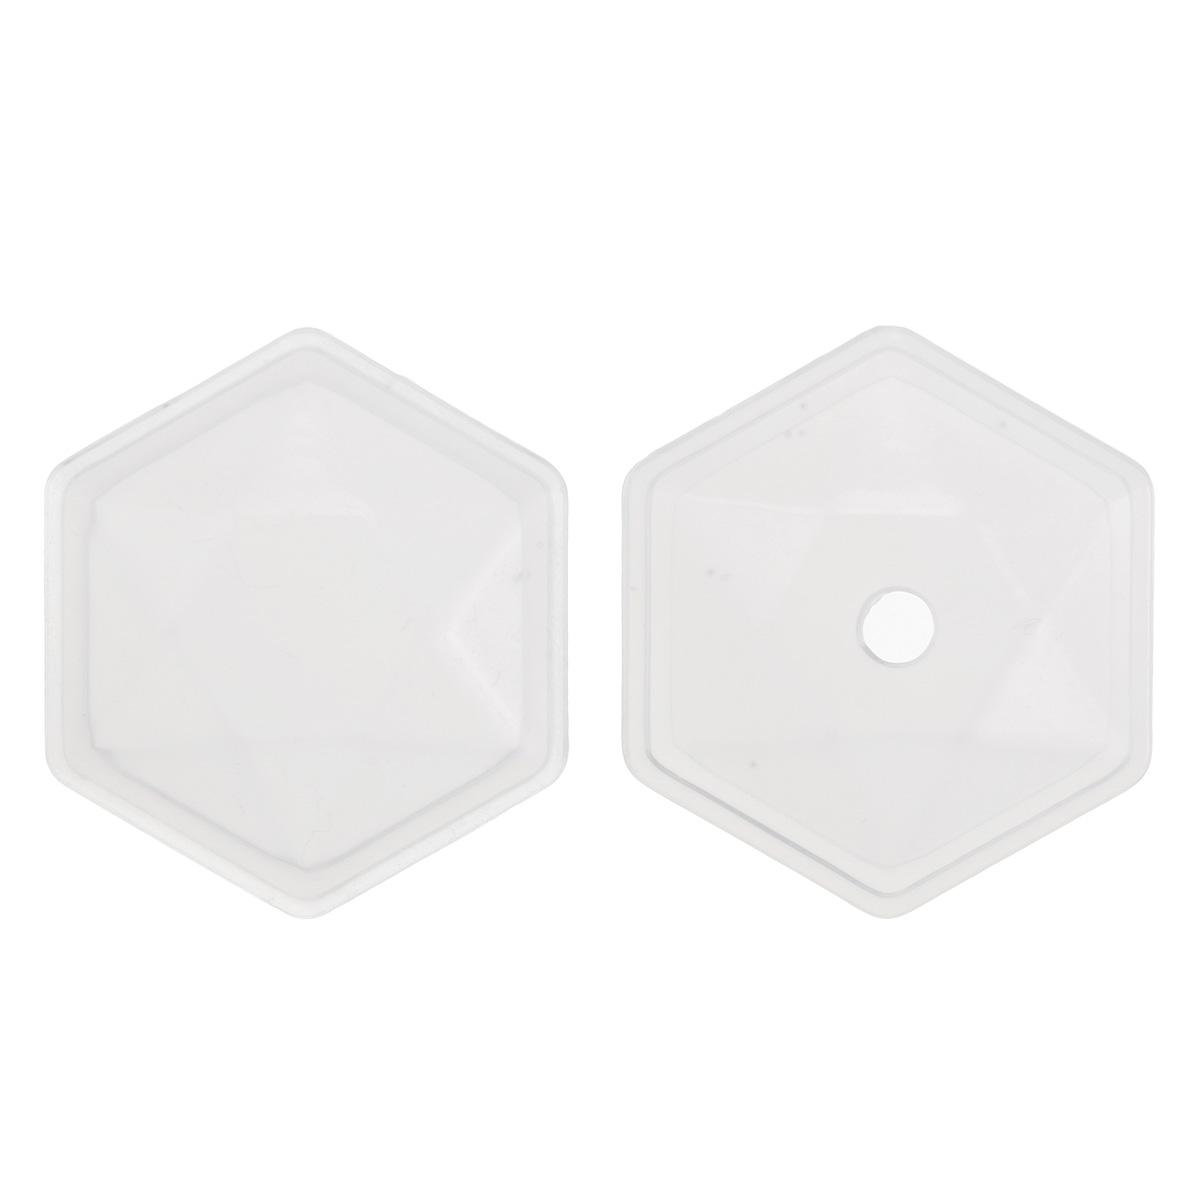 98Pcs-DIY-Silicone-Pendant-Mold-Jewelry-Making-Cube-Resin-Casting-Molds-Craft-Tools-Kit-1517942